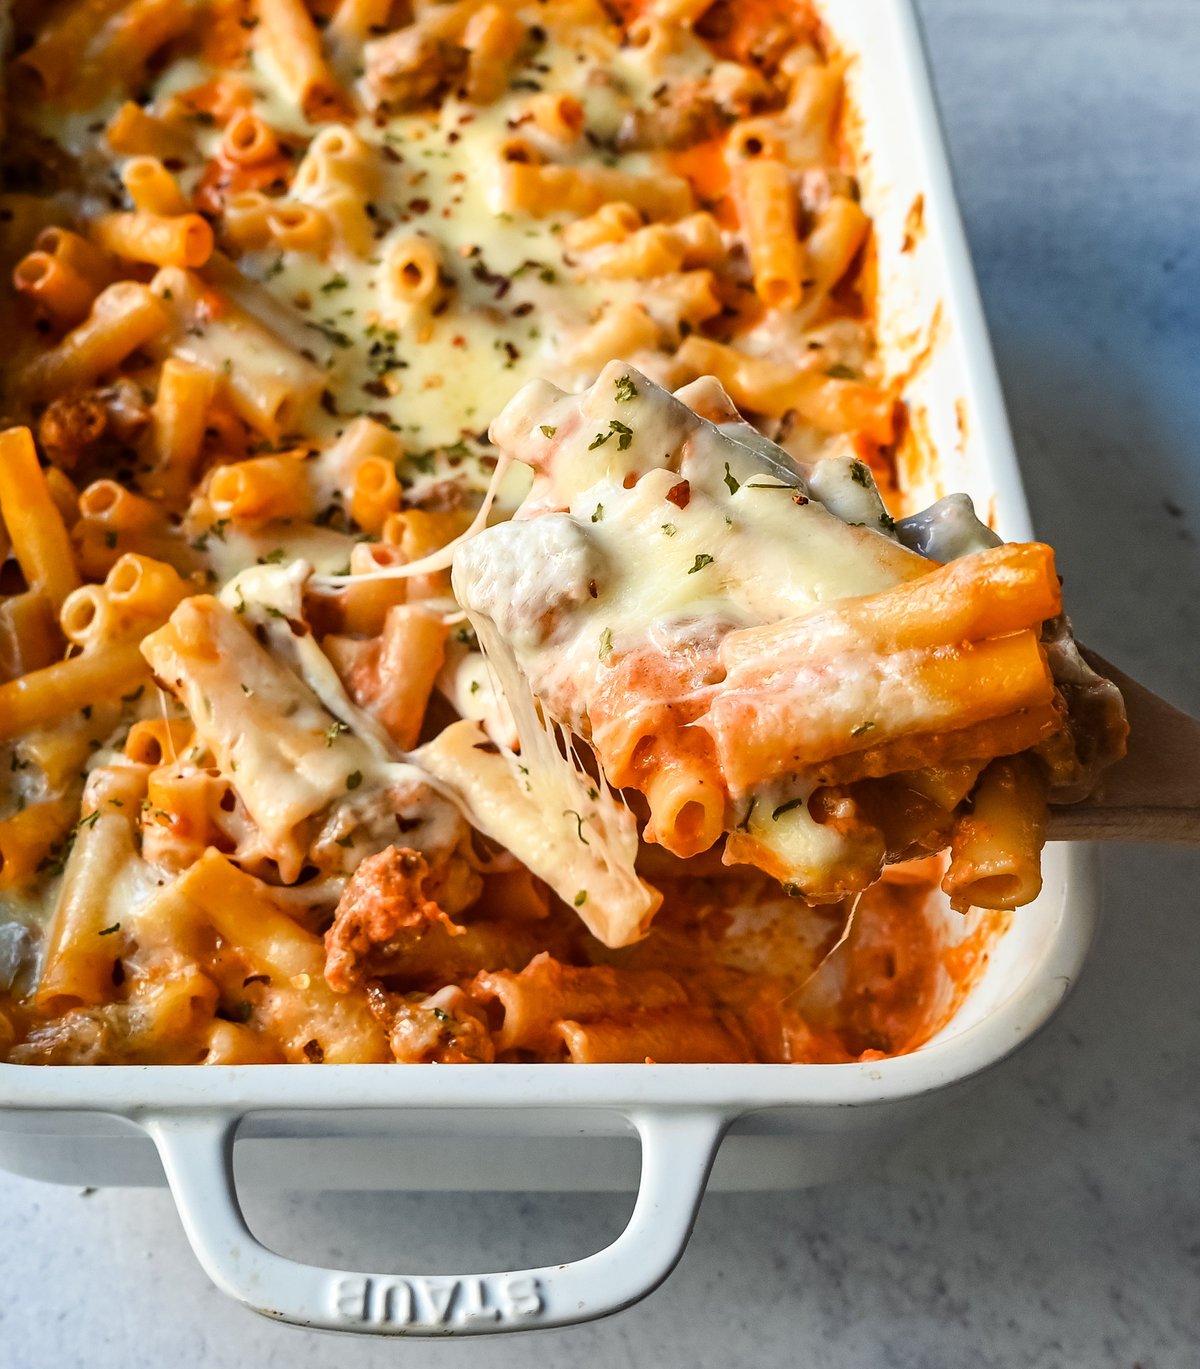 This Baked Ziti Pasta is made with ziti noodles, sausage, marinara sauce, fresh basil, spices, whole milk mozzarella cheese, parmesan cheese, and heavy cream and baked until the cheese is melted. The best-baked ziti recipe! This is a perfect recipe to freeze or make ahead of time.